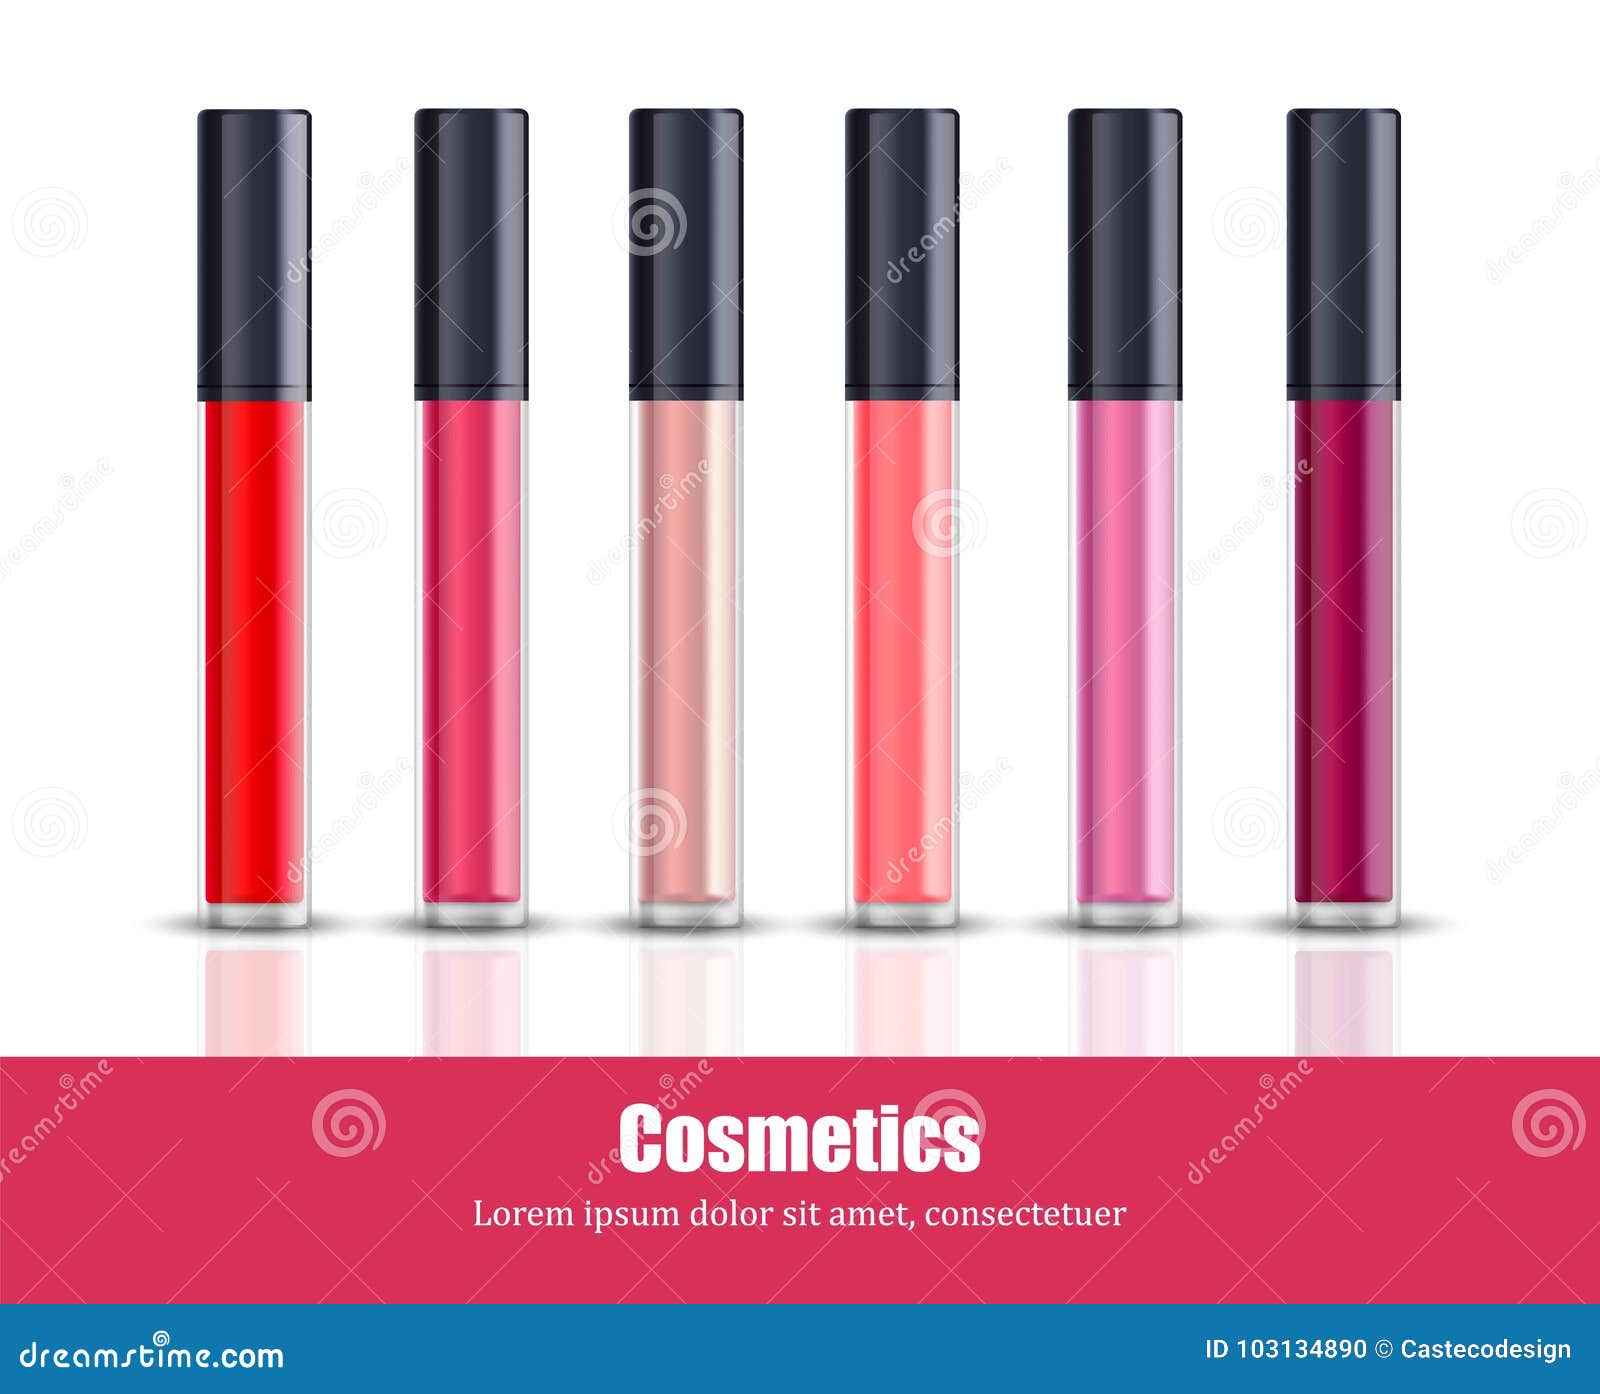 lipgloss beauty collection icons template 